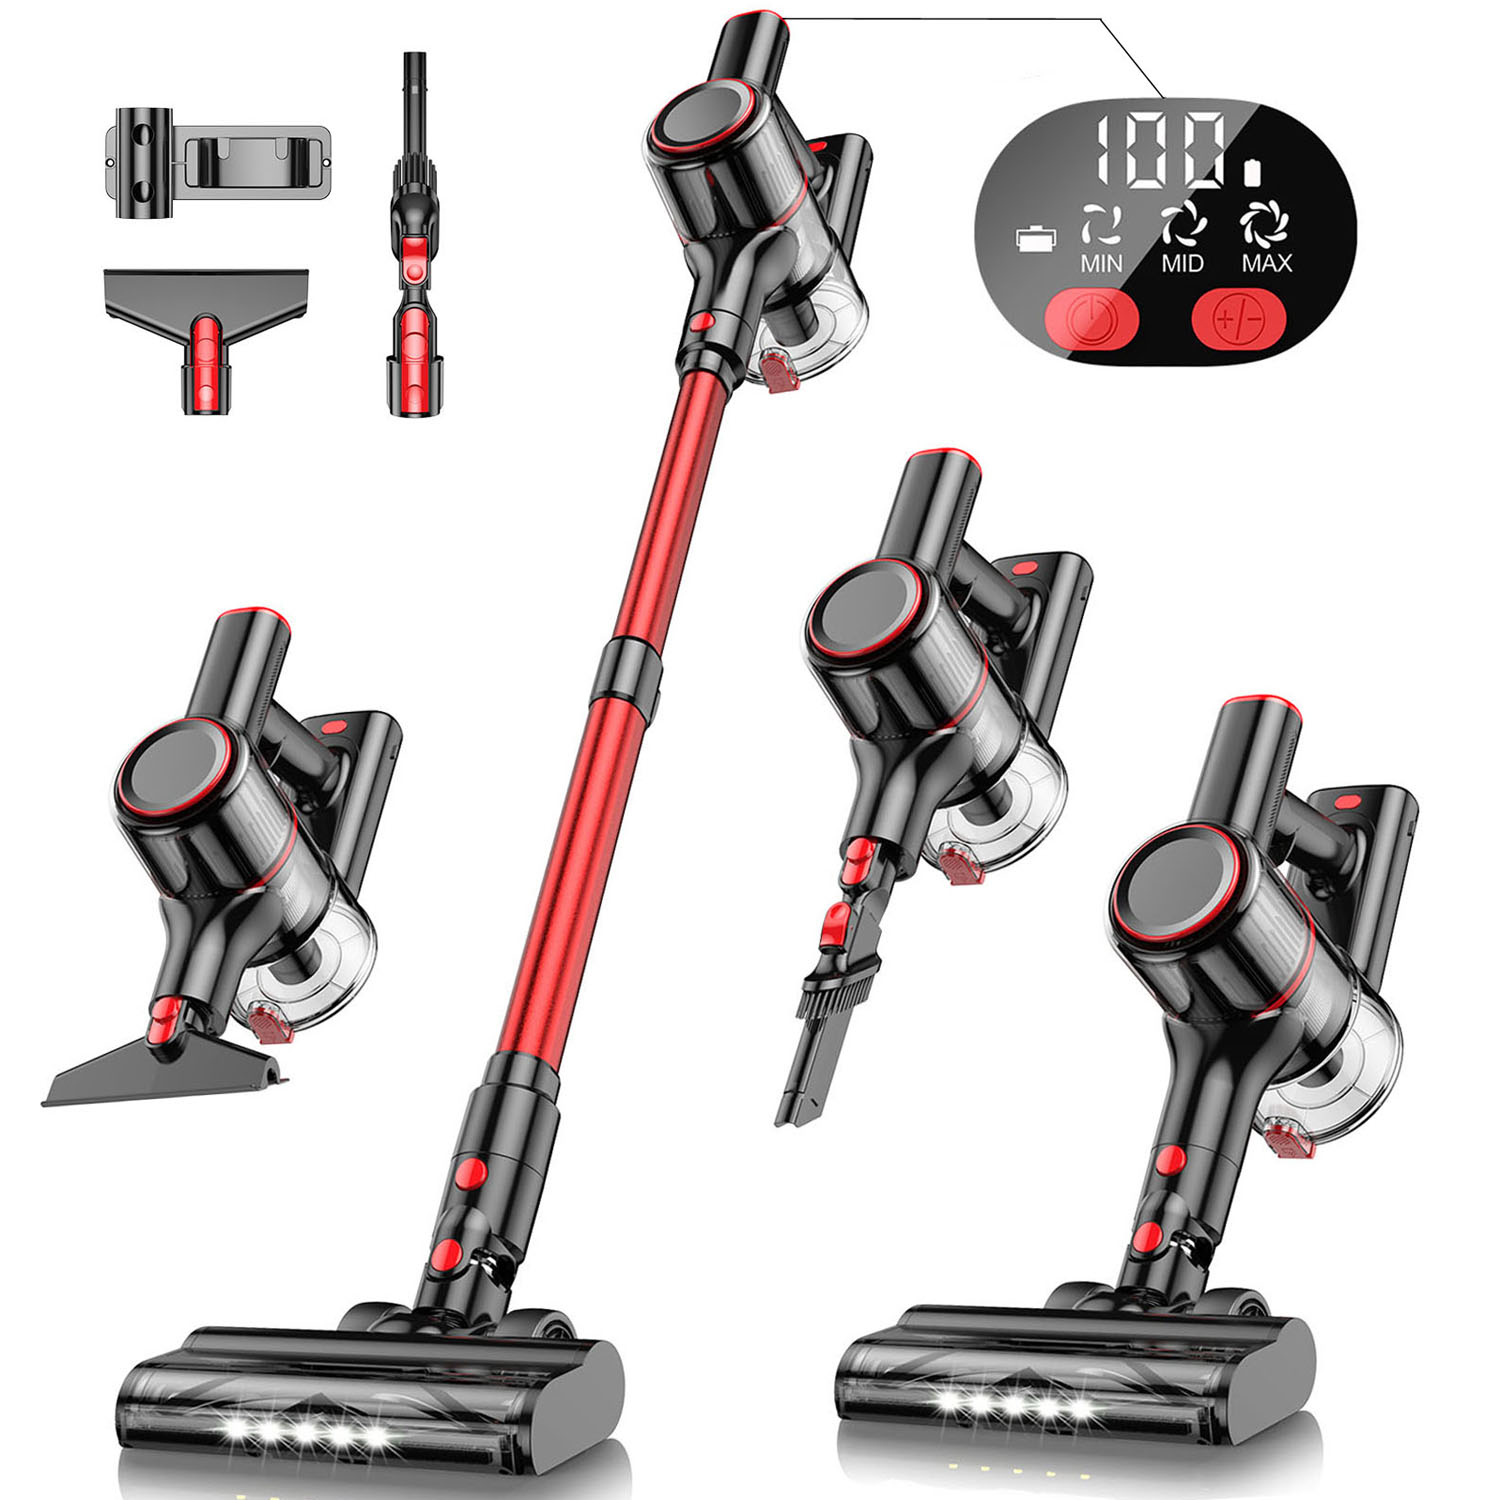 

Cordless Vacuum Cleaner, 8 In 1 Stick Vacuum With 30kpa Powerful Suction, Led Display, 3 Modes Suction, Anti-tangle & 1.2 Dust Cup, Lightweight Vacuum For Hardwood Floor/carpet/pet Hair, Red